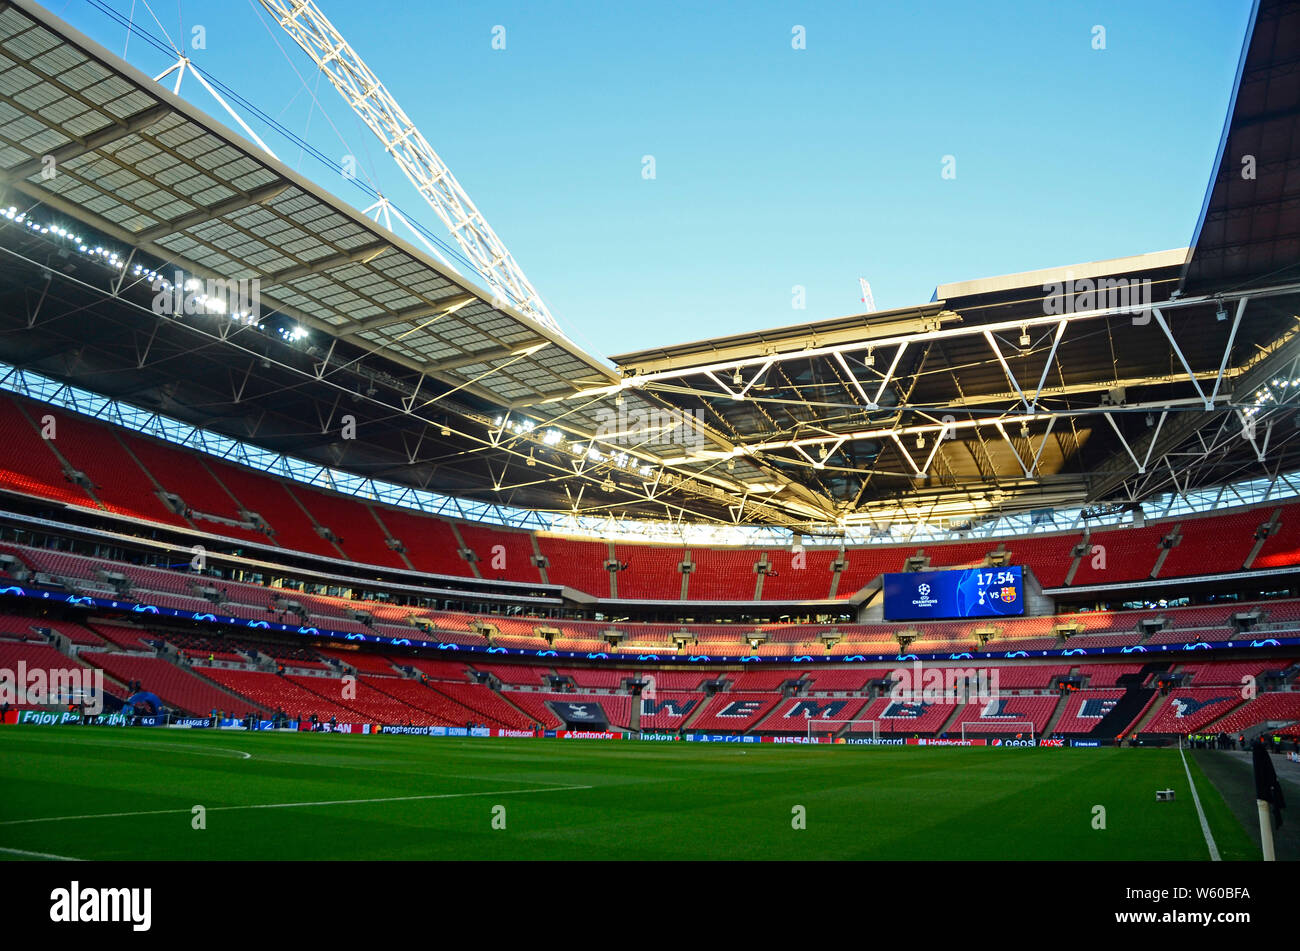 LONDON, ENGLAND - OCTOBER 3, 2018: View of the venue prior to the 2018/19 UEFA Champions League Group B game between Tottenham Hotspur (England) and FC Barcelona (Spain) at Wembley Stadium. Stock Photo